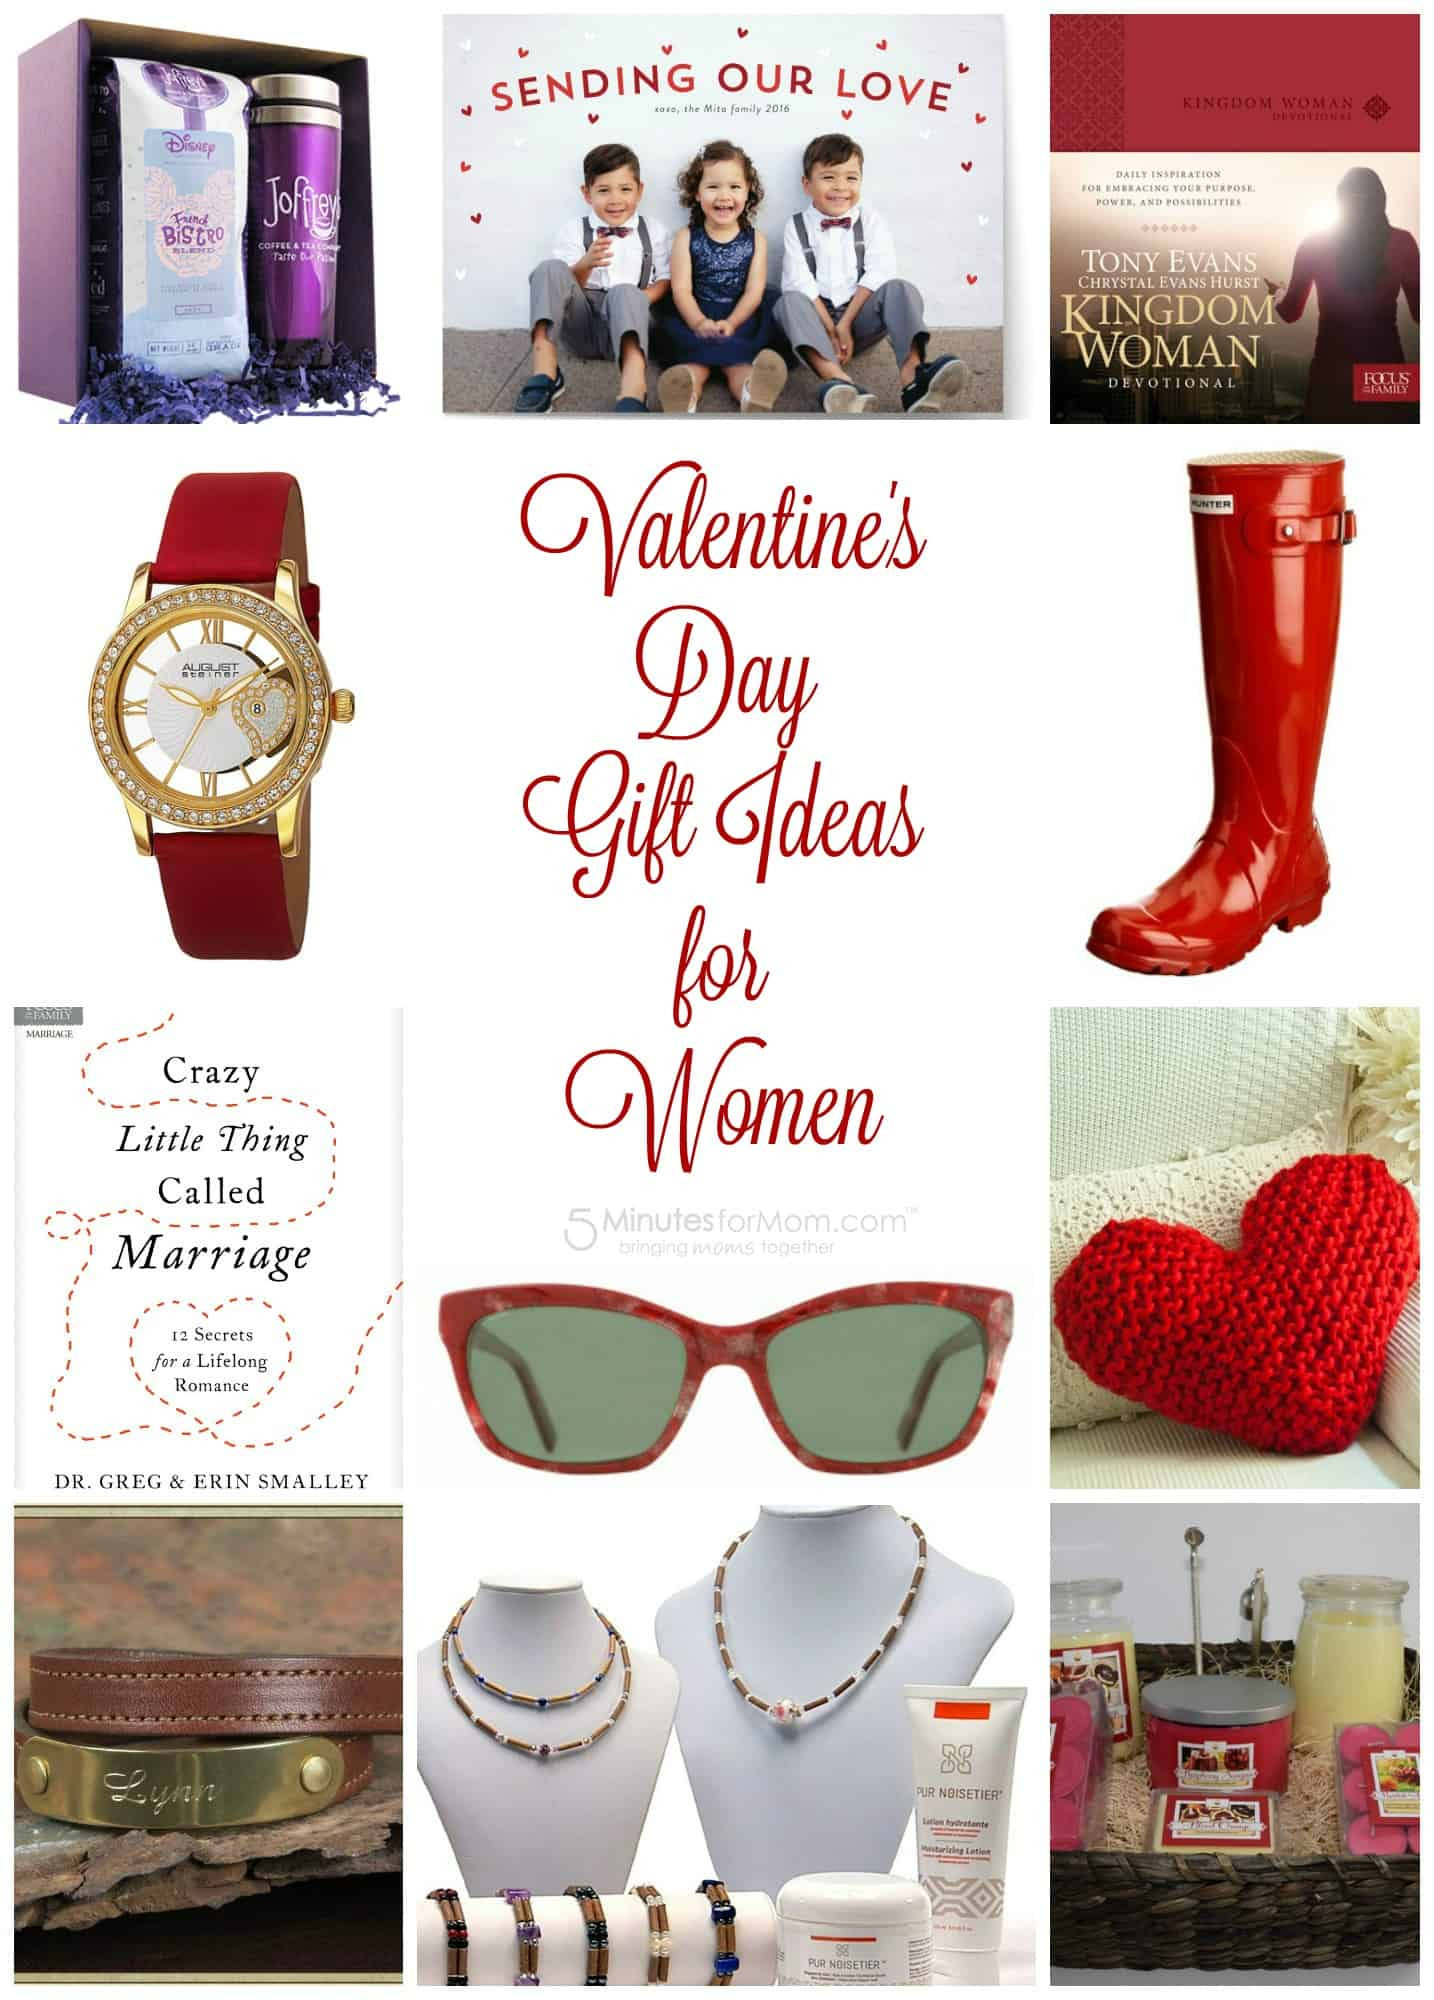 Valentines Gift Ideas for Women Lovely Valentine S Day Gift Guide for Women Plus $100 Amazon